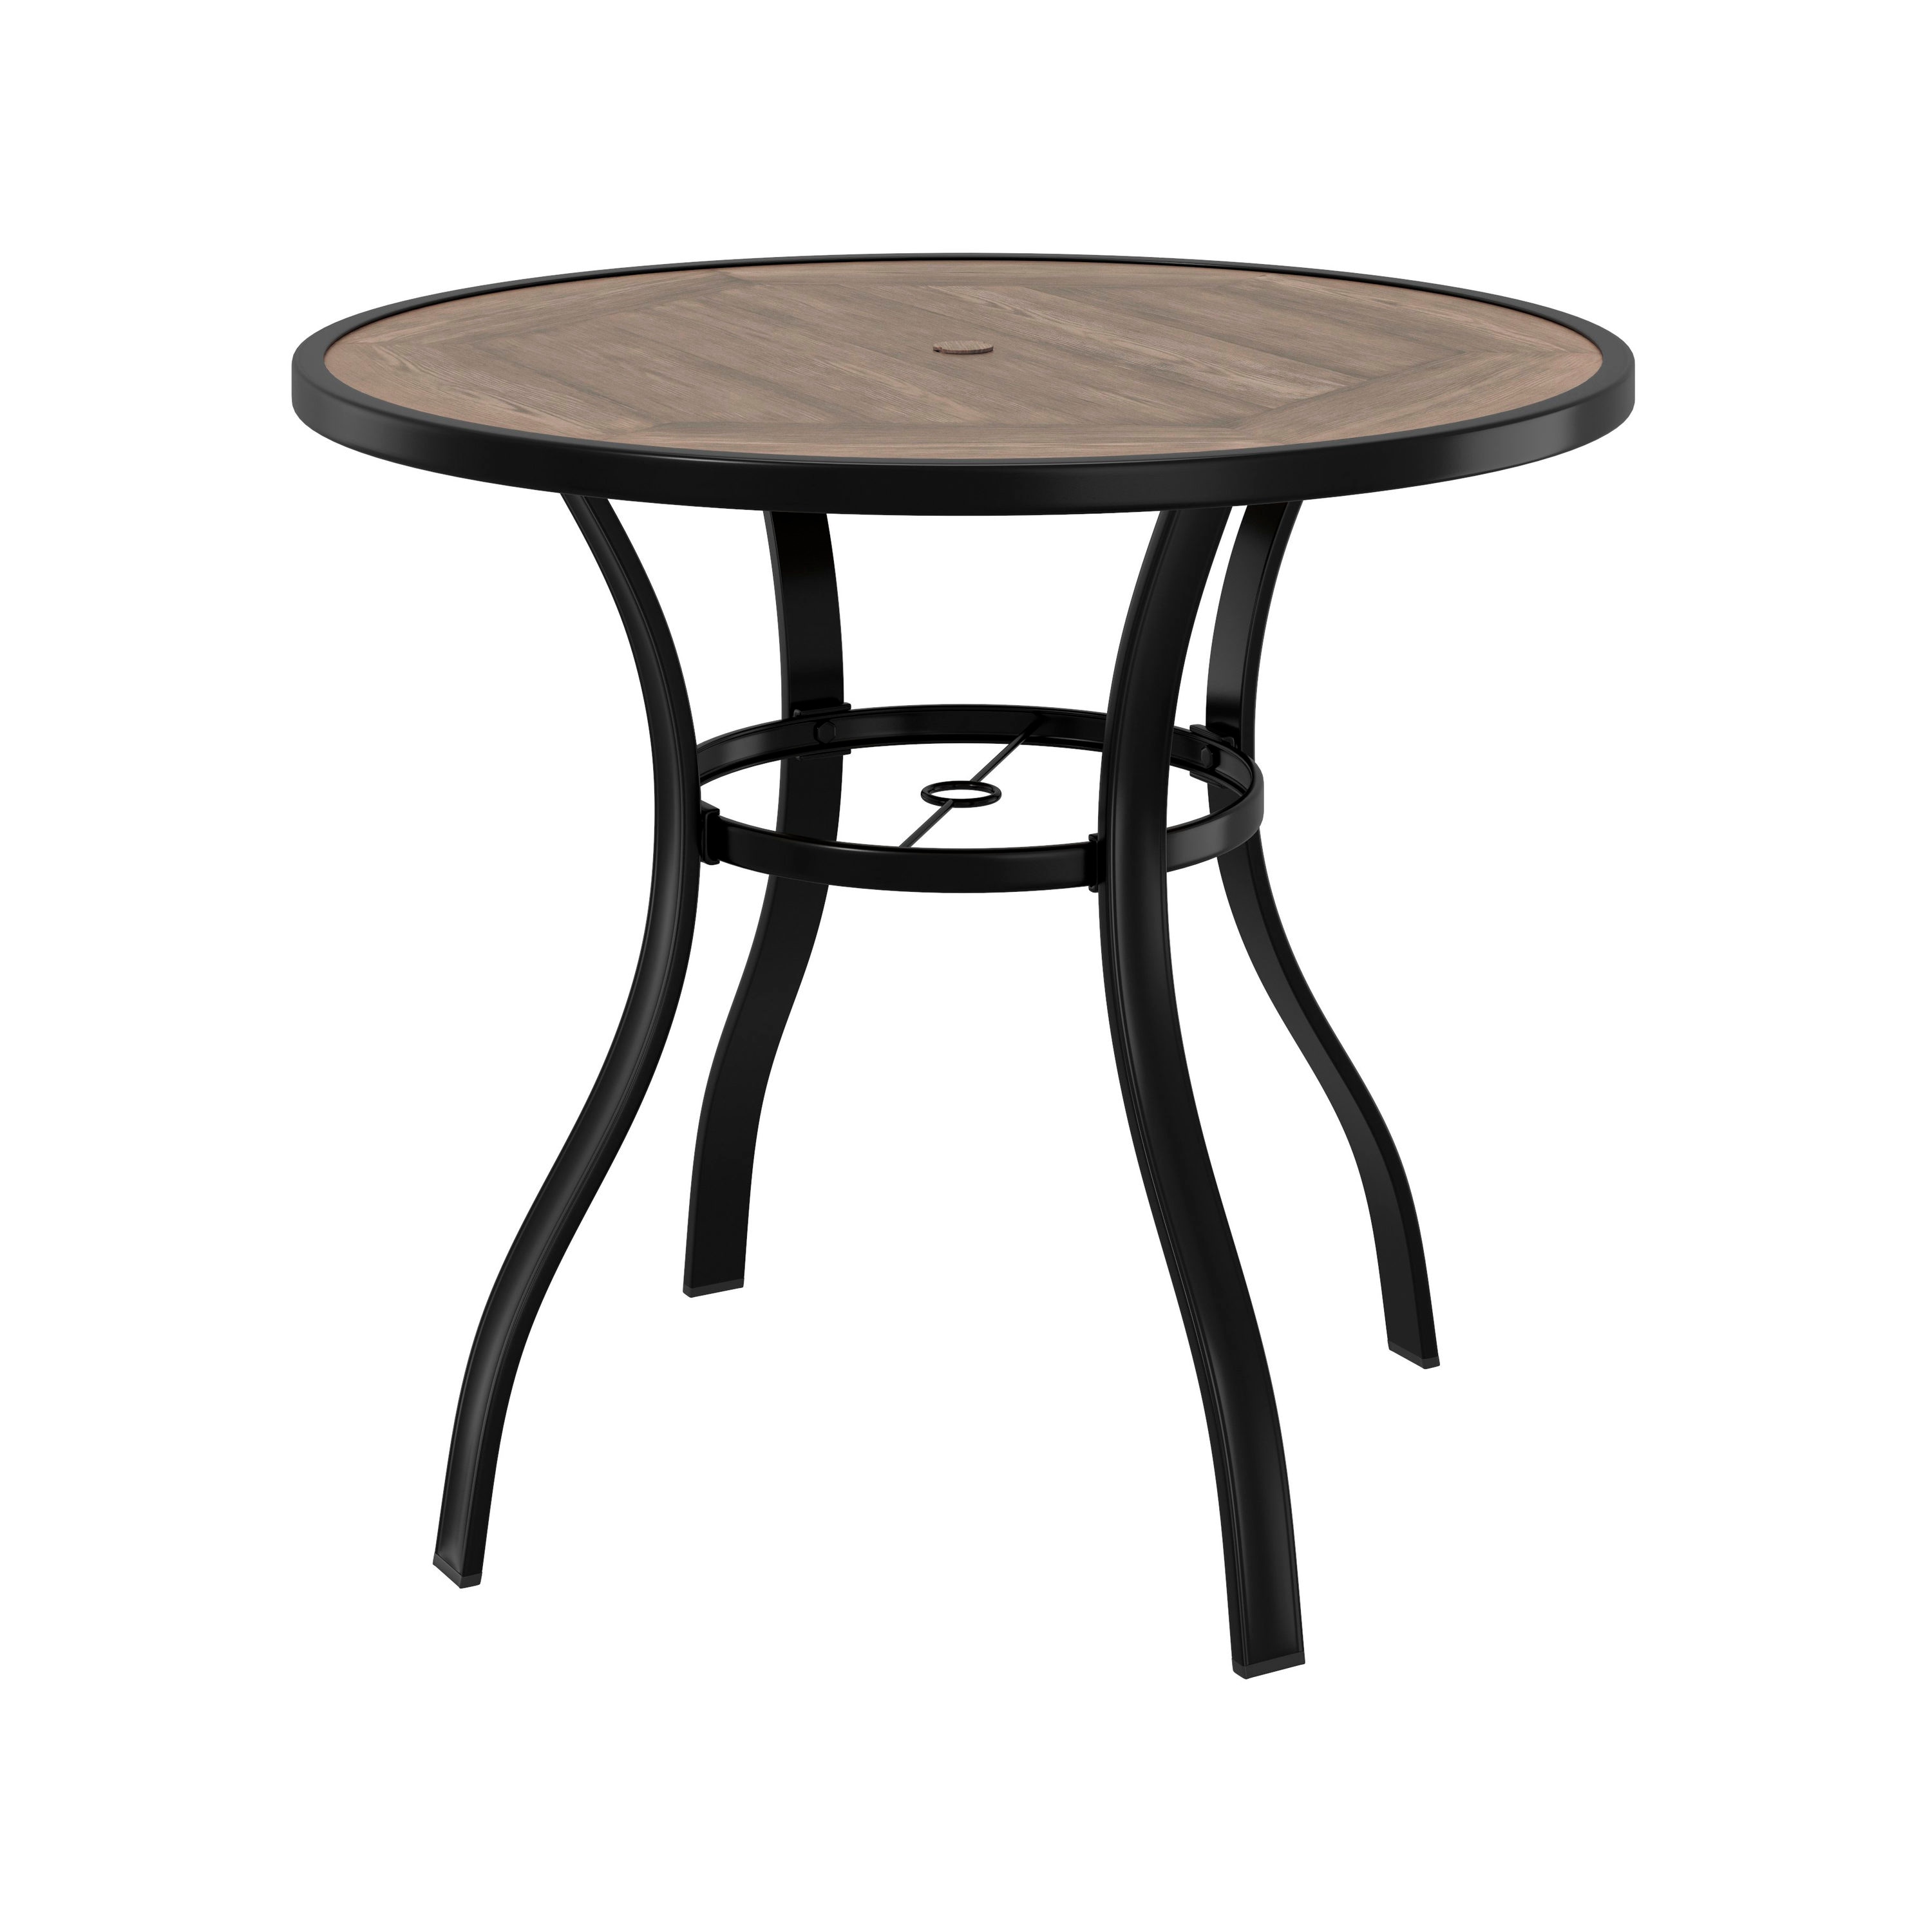 Allen Roth Copper Pointe Round Outdoor Dining Table 43 9 In W X L With Umbrella Hole The Patio Tables Department At Com - Round Patio Table With Umbrella Hole Set